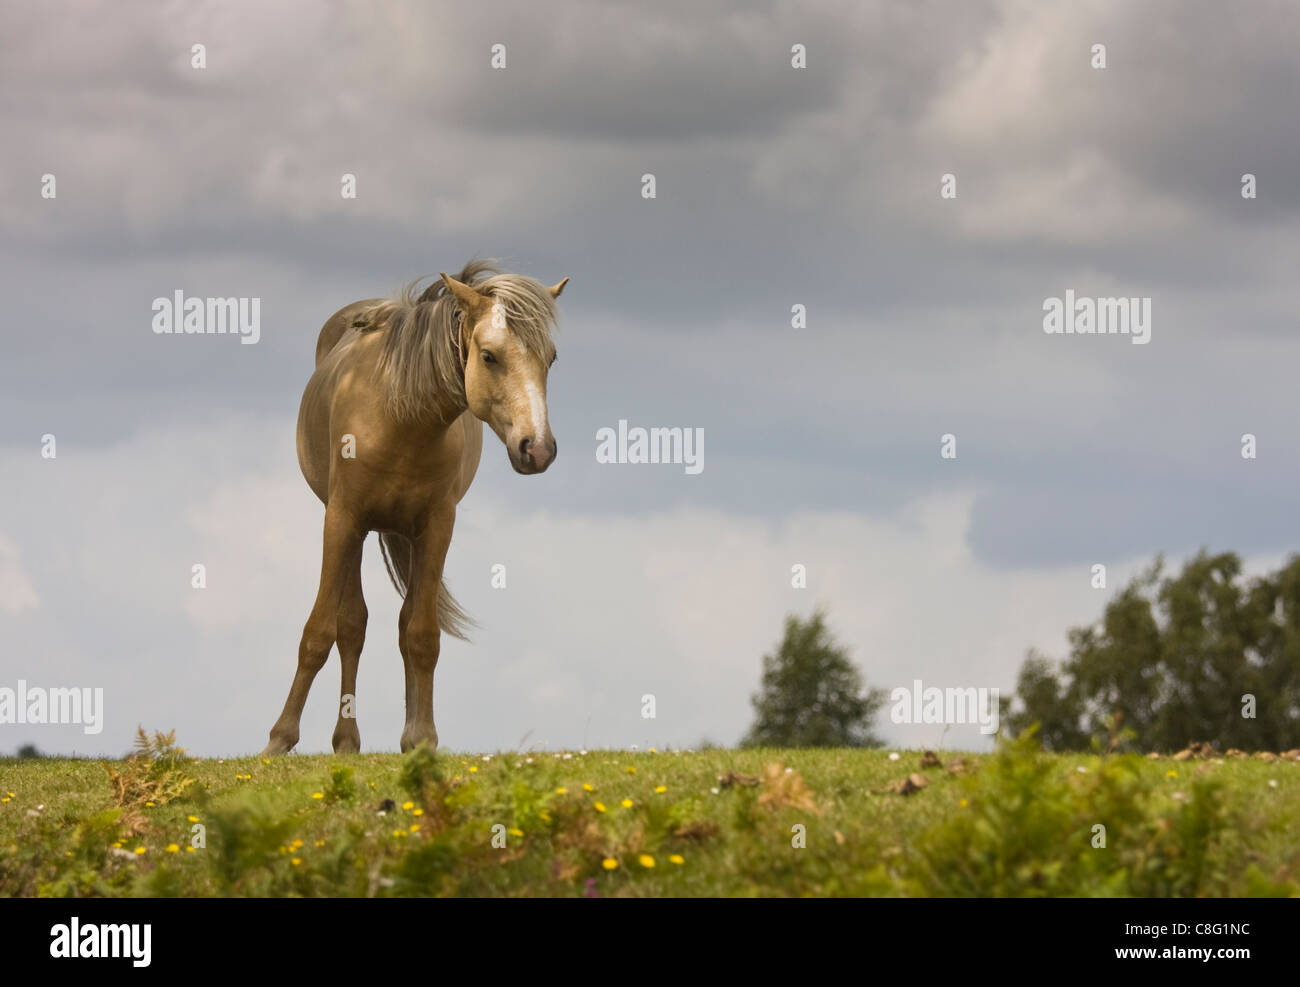 A lone pony stands in the sunshine on the horizon. Clouds build ominously in the background. Stock Photo